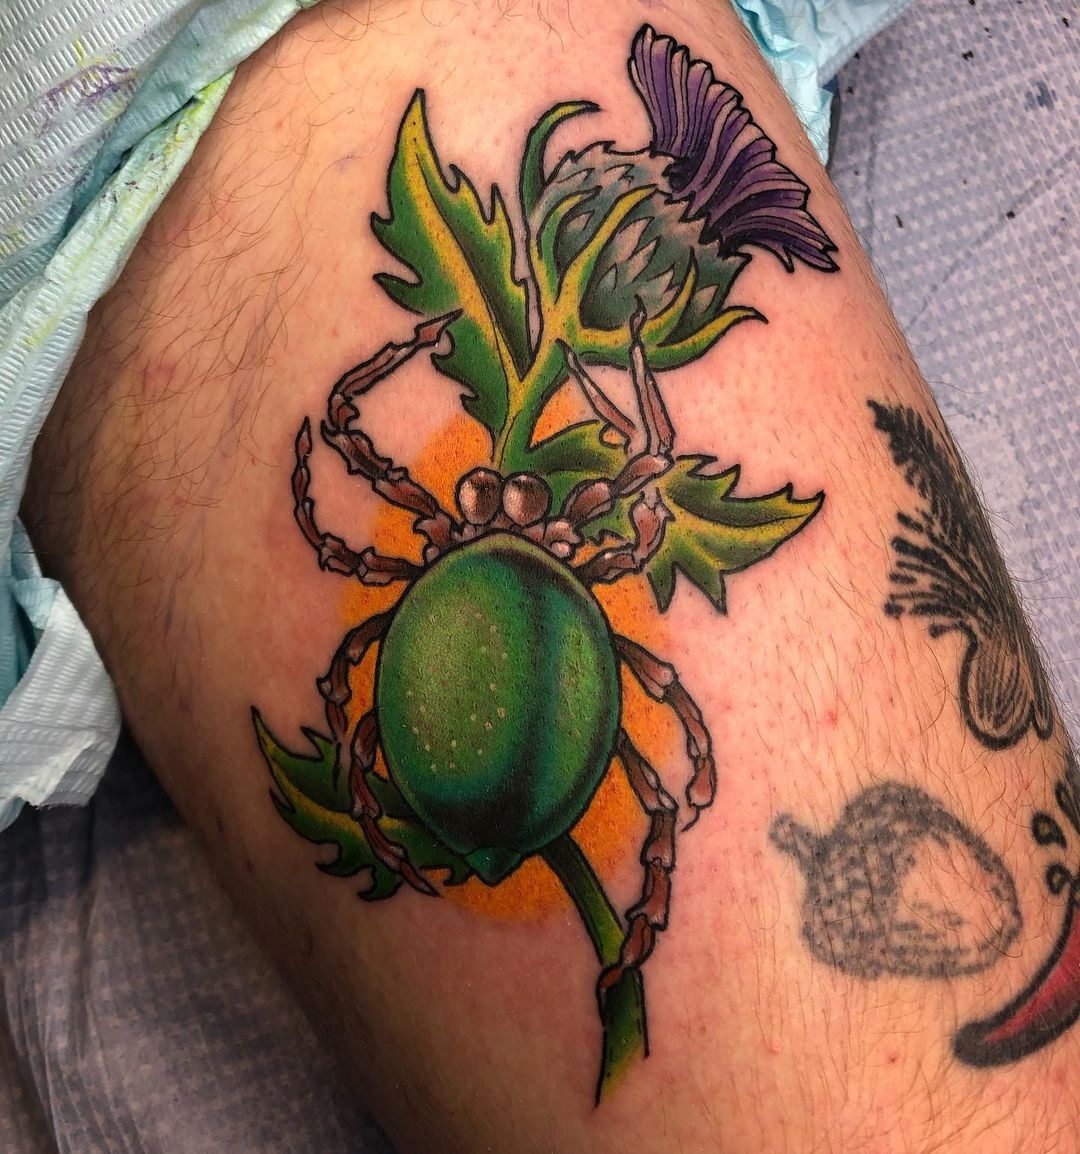 Full color tattoo of a spider crawling up a thistle. Book a custom tattoo with Chris at Sacred Mandala Studio - Durham, NC.